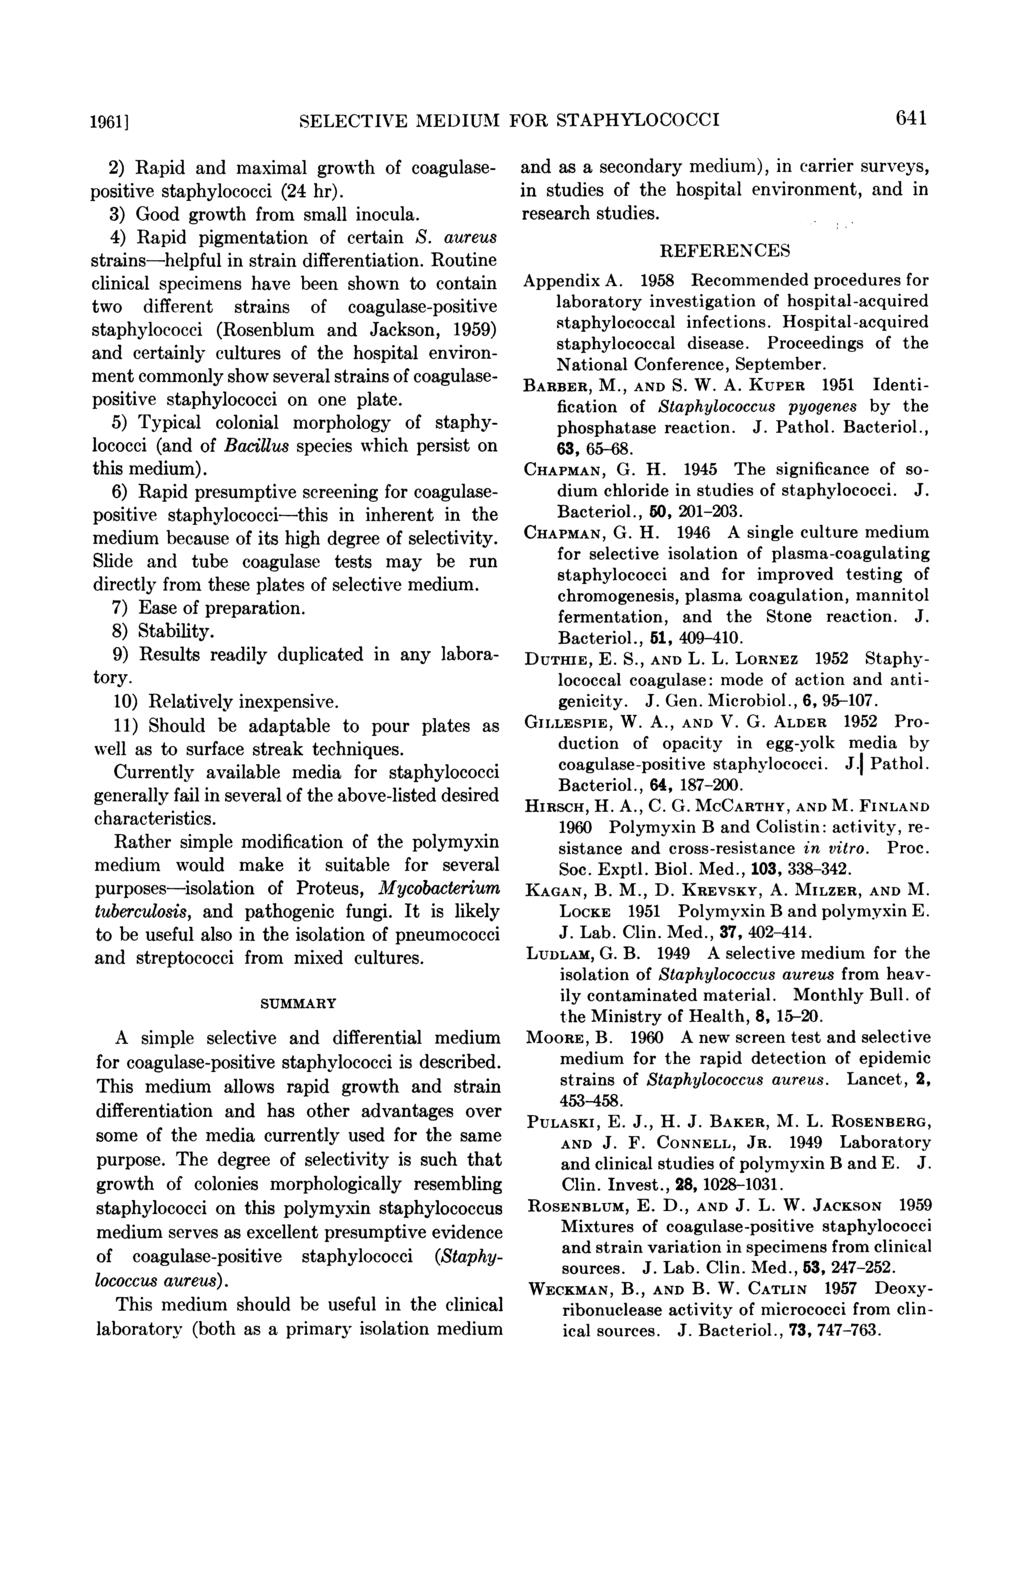 1961] SELECTIVE MEDIUMN FOR STAPHYLOCOCCI 2) Rapid and maximal growth of coagulasepositive staphylococci (24 hr). 3) Good growth from small inocula. 4) Rapid pigmentation of certain S.